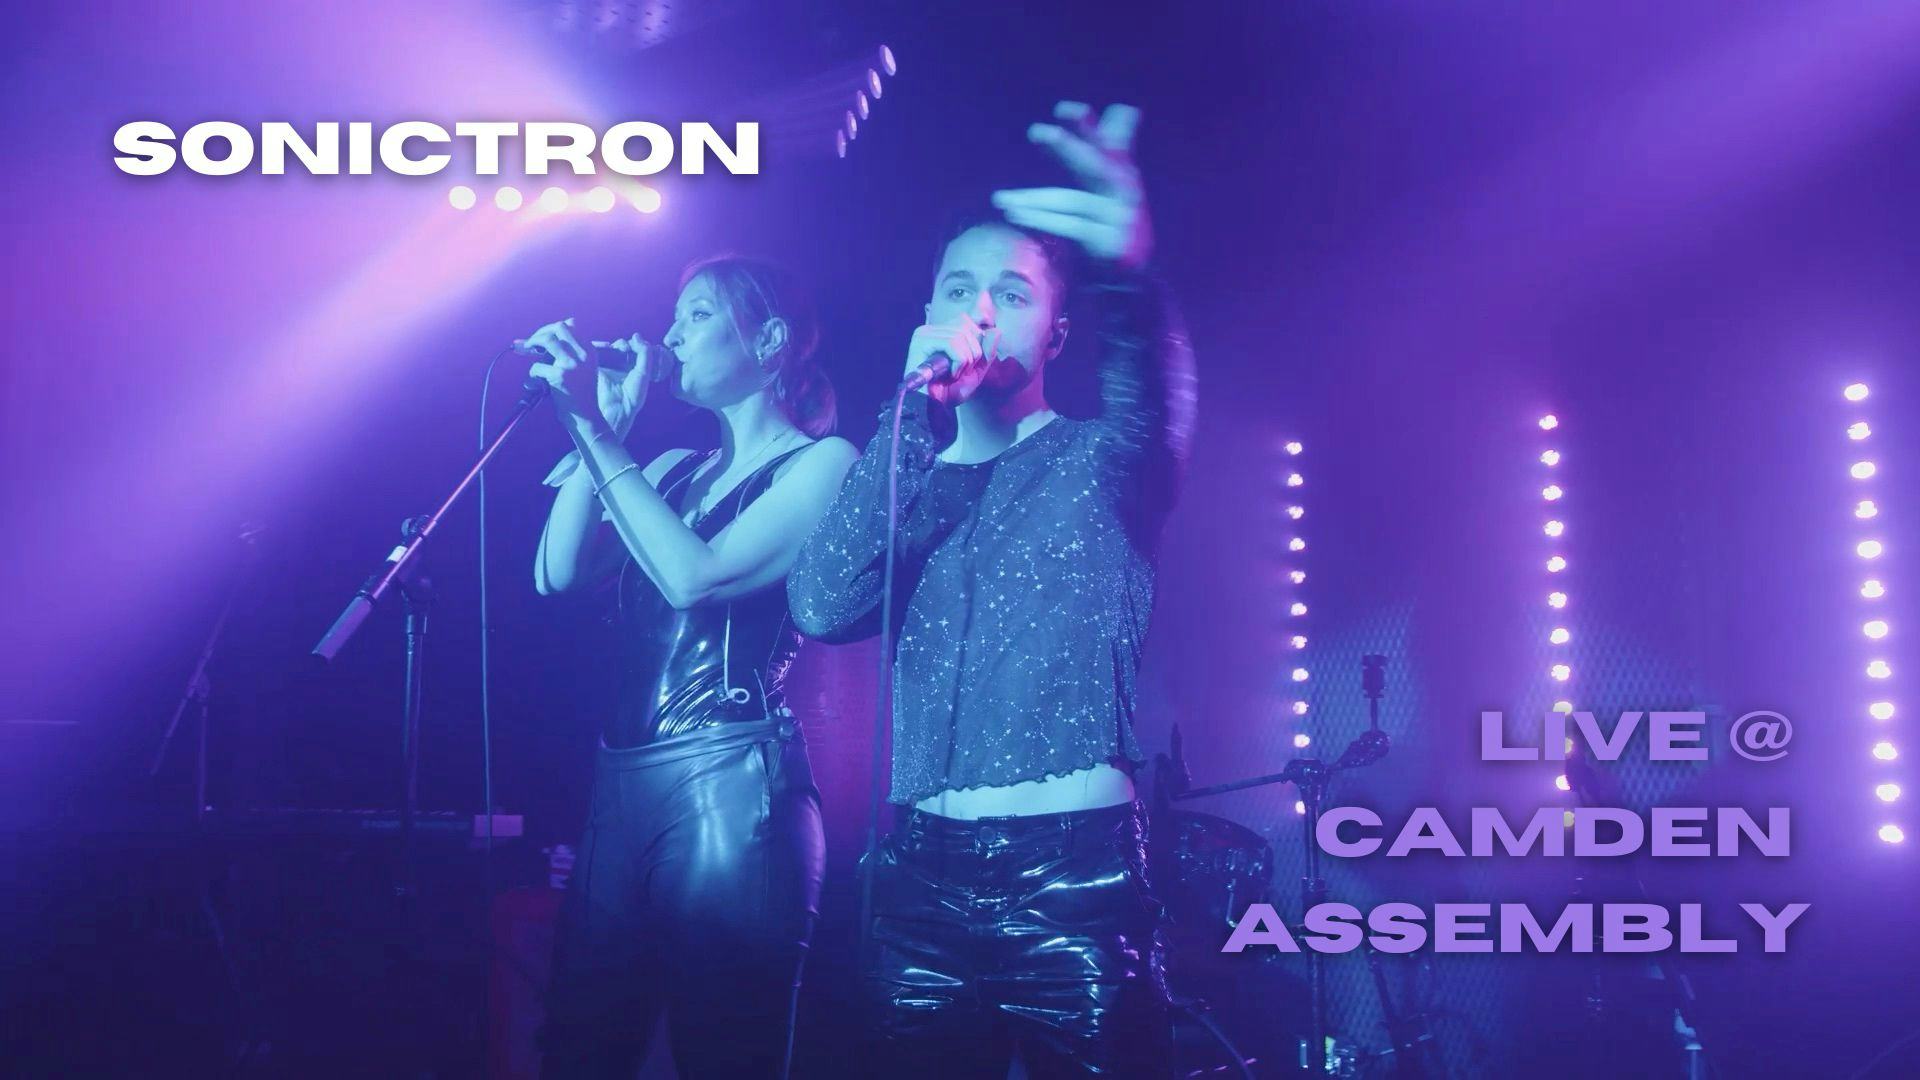 Sonictron Live at Camden Assembly